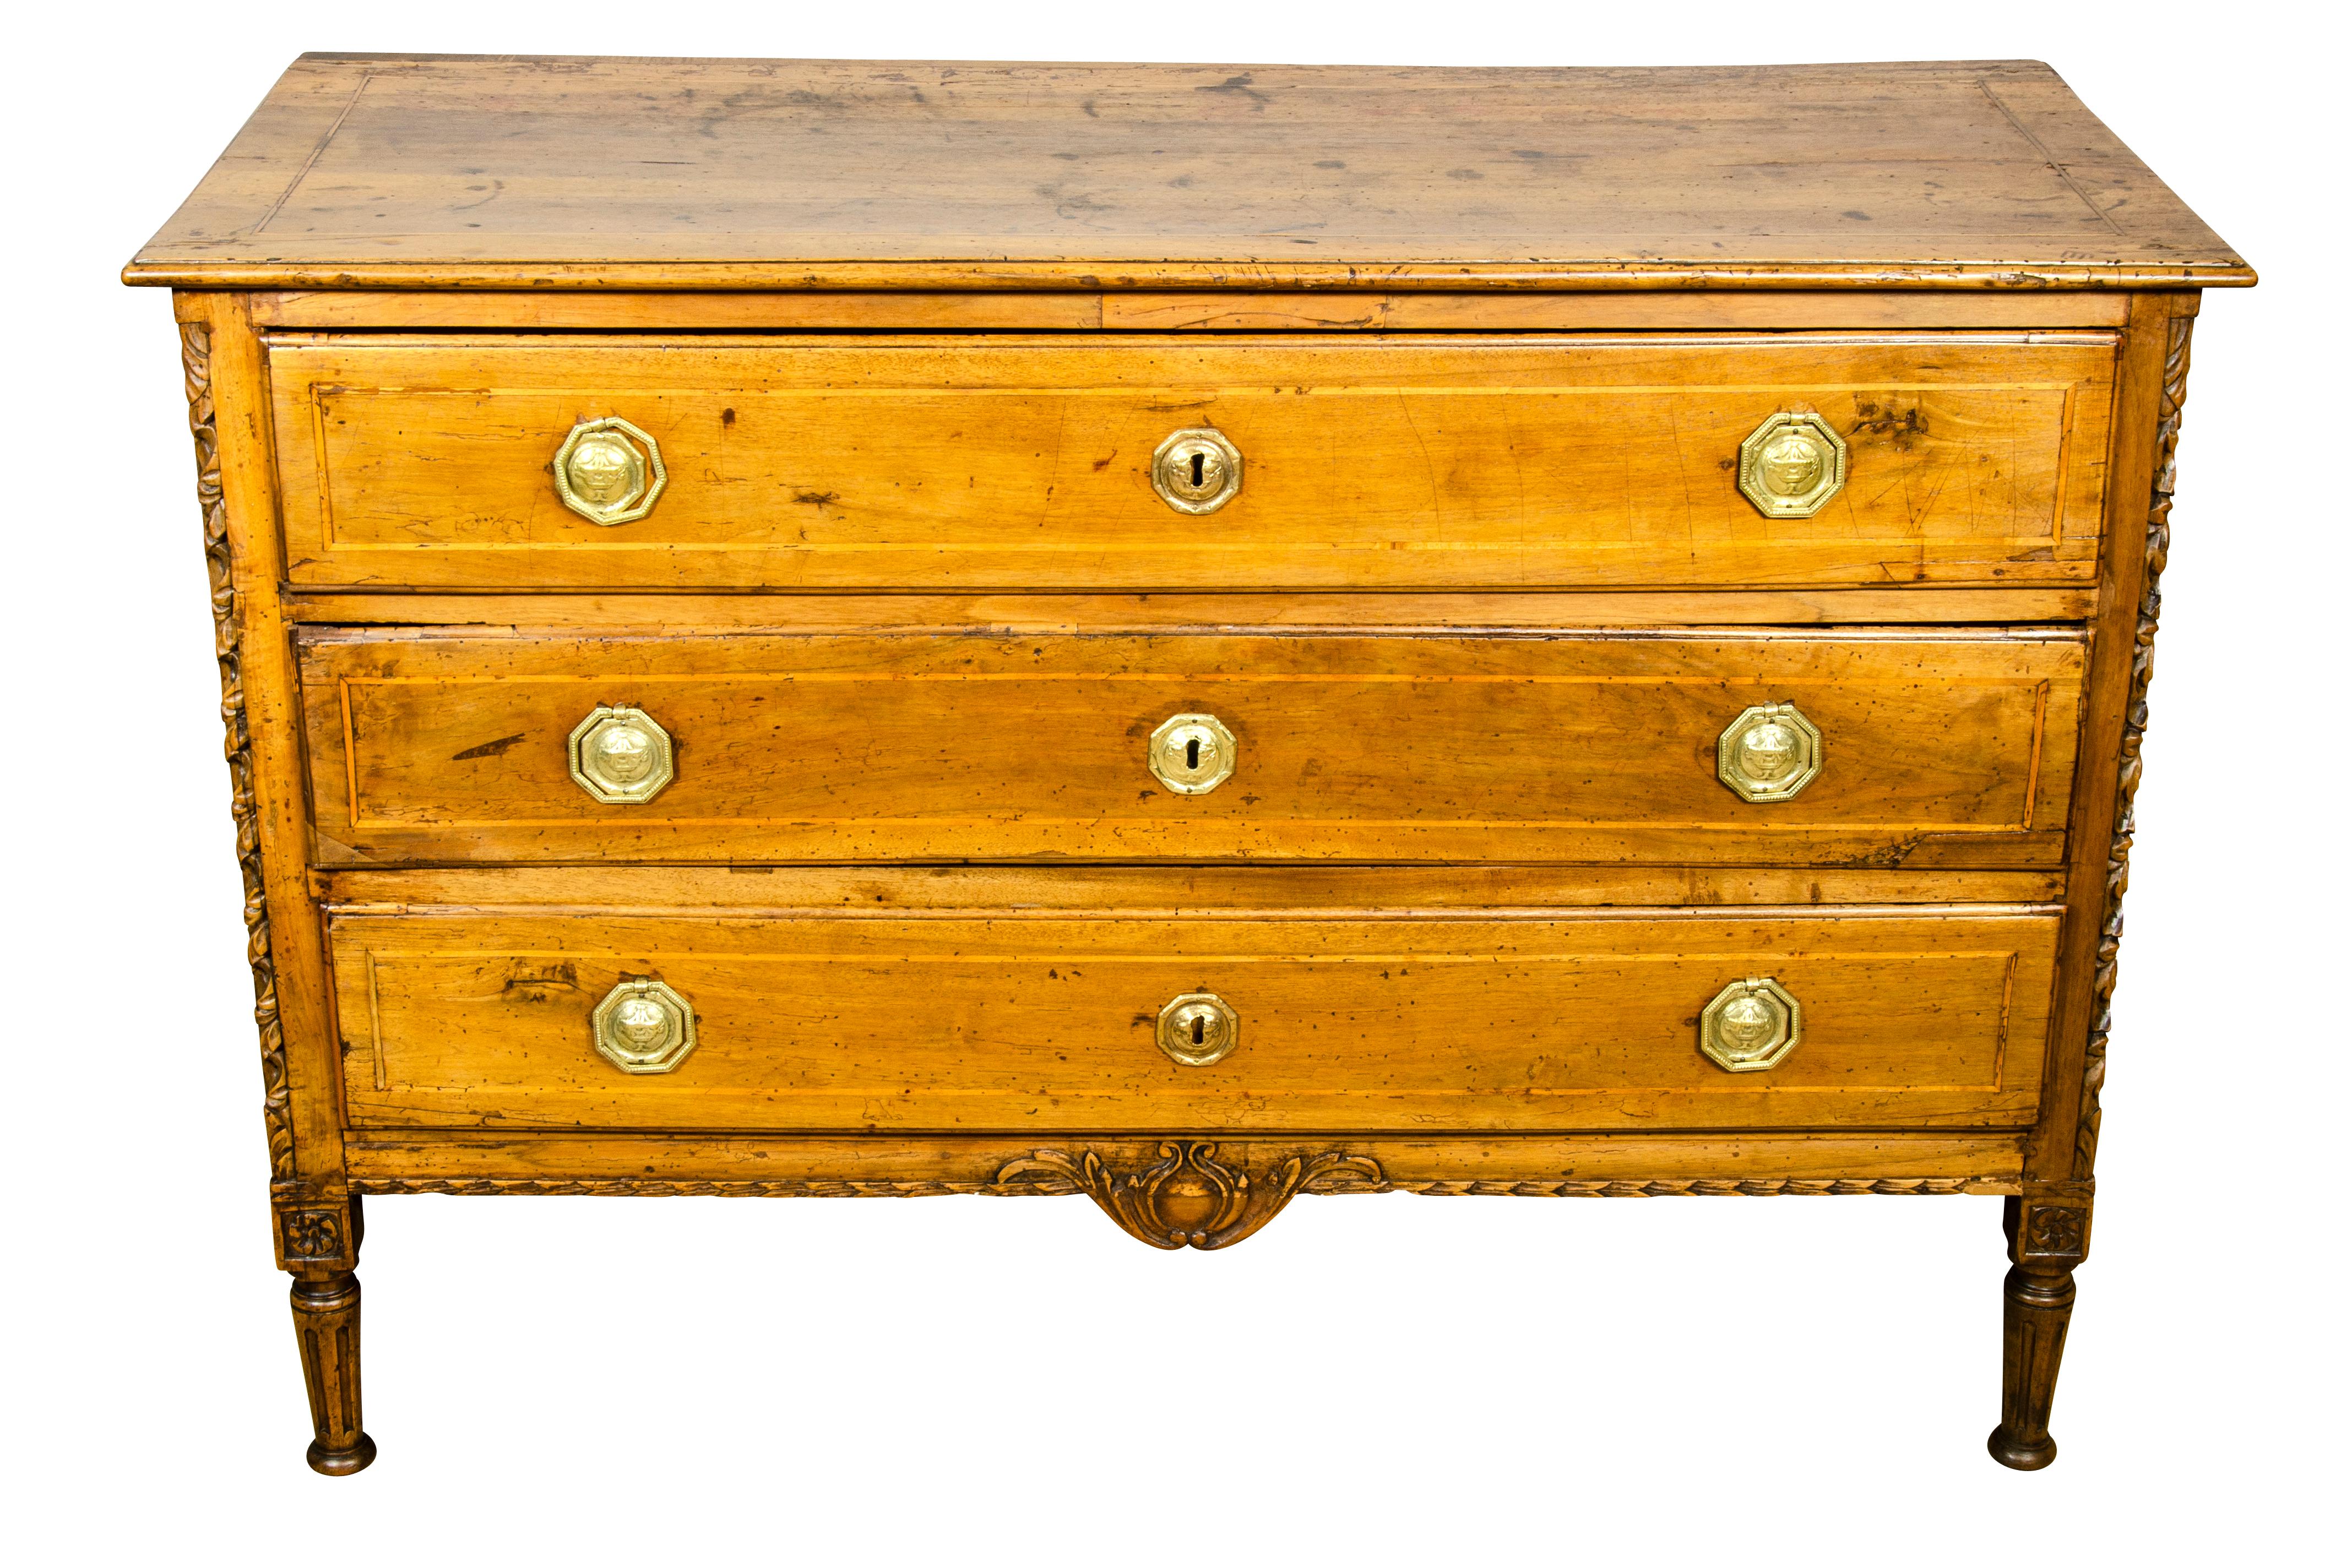 Rectangular top with string banded inlay over three drawers, flanked by a framed case with carved corners and central carving on apron, raised on circular tapered fluted legs headed by carved rosettes. Brass handles.